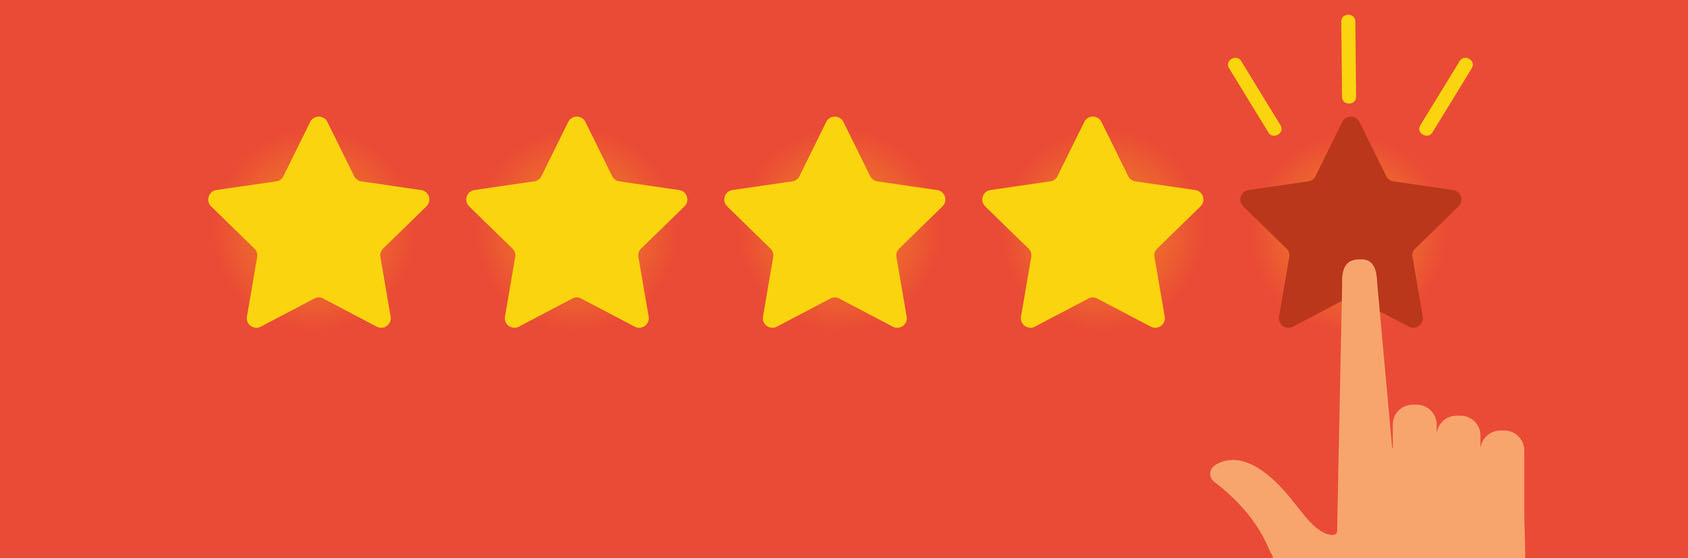 A Learning Curve for Using Online Reviews